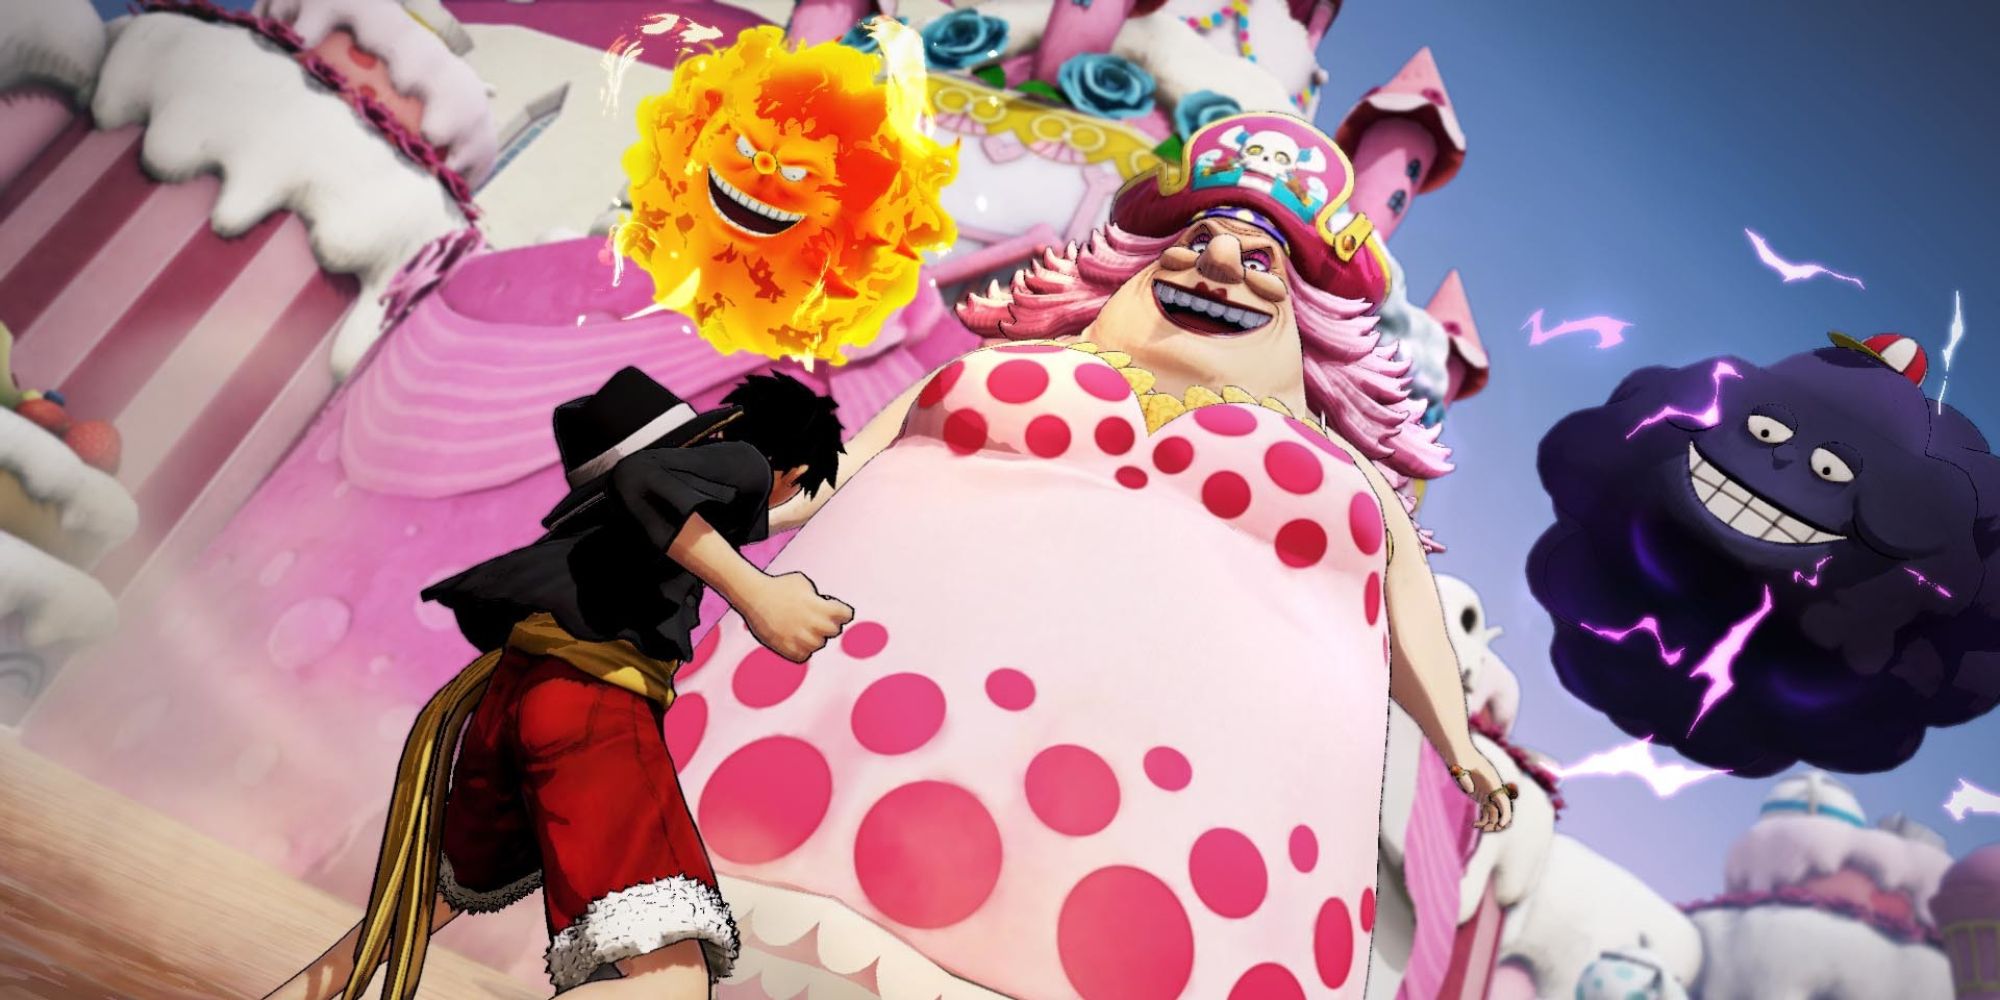 One Piece Pirate Warriors 4 Screenshot Of Monkey D. Luffy Fighting Large Pirate